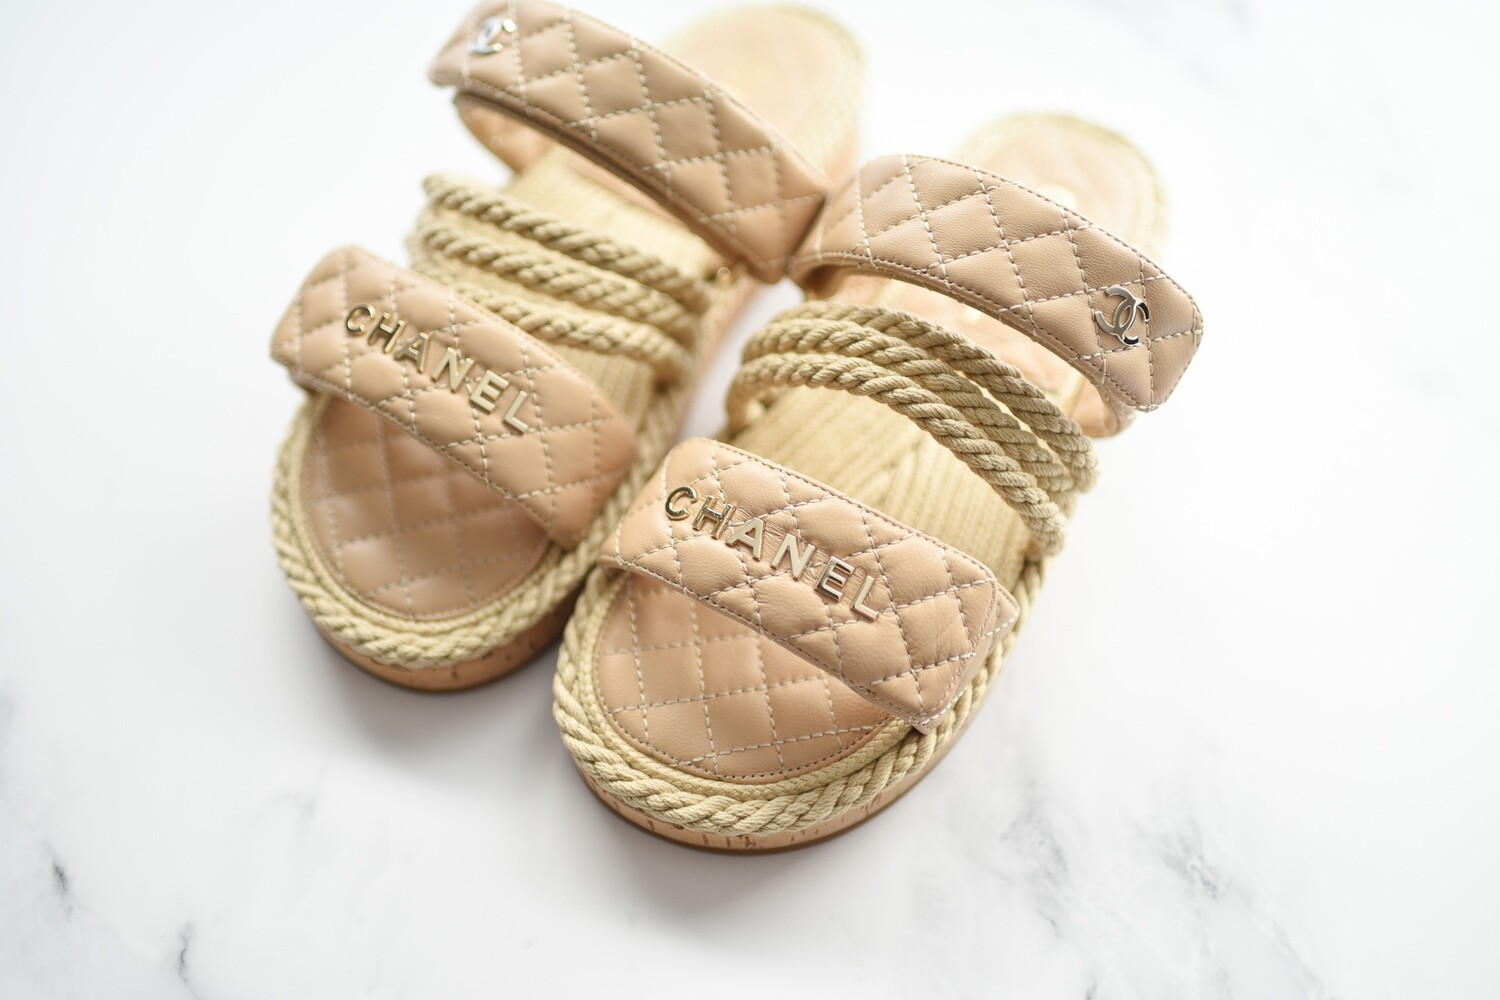 Chanel Shoes Dad Sandals Beige, Size 37, New in Box GA001